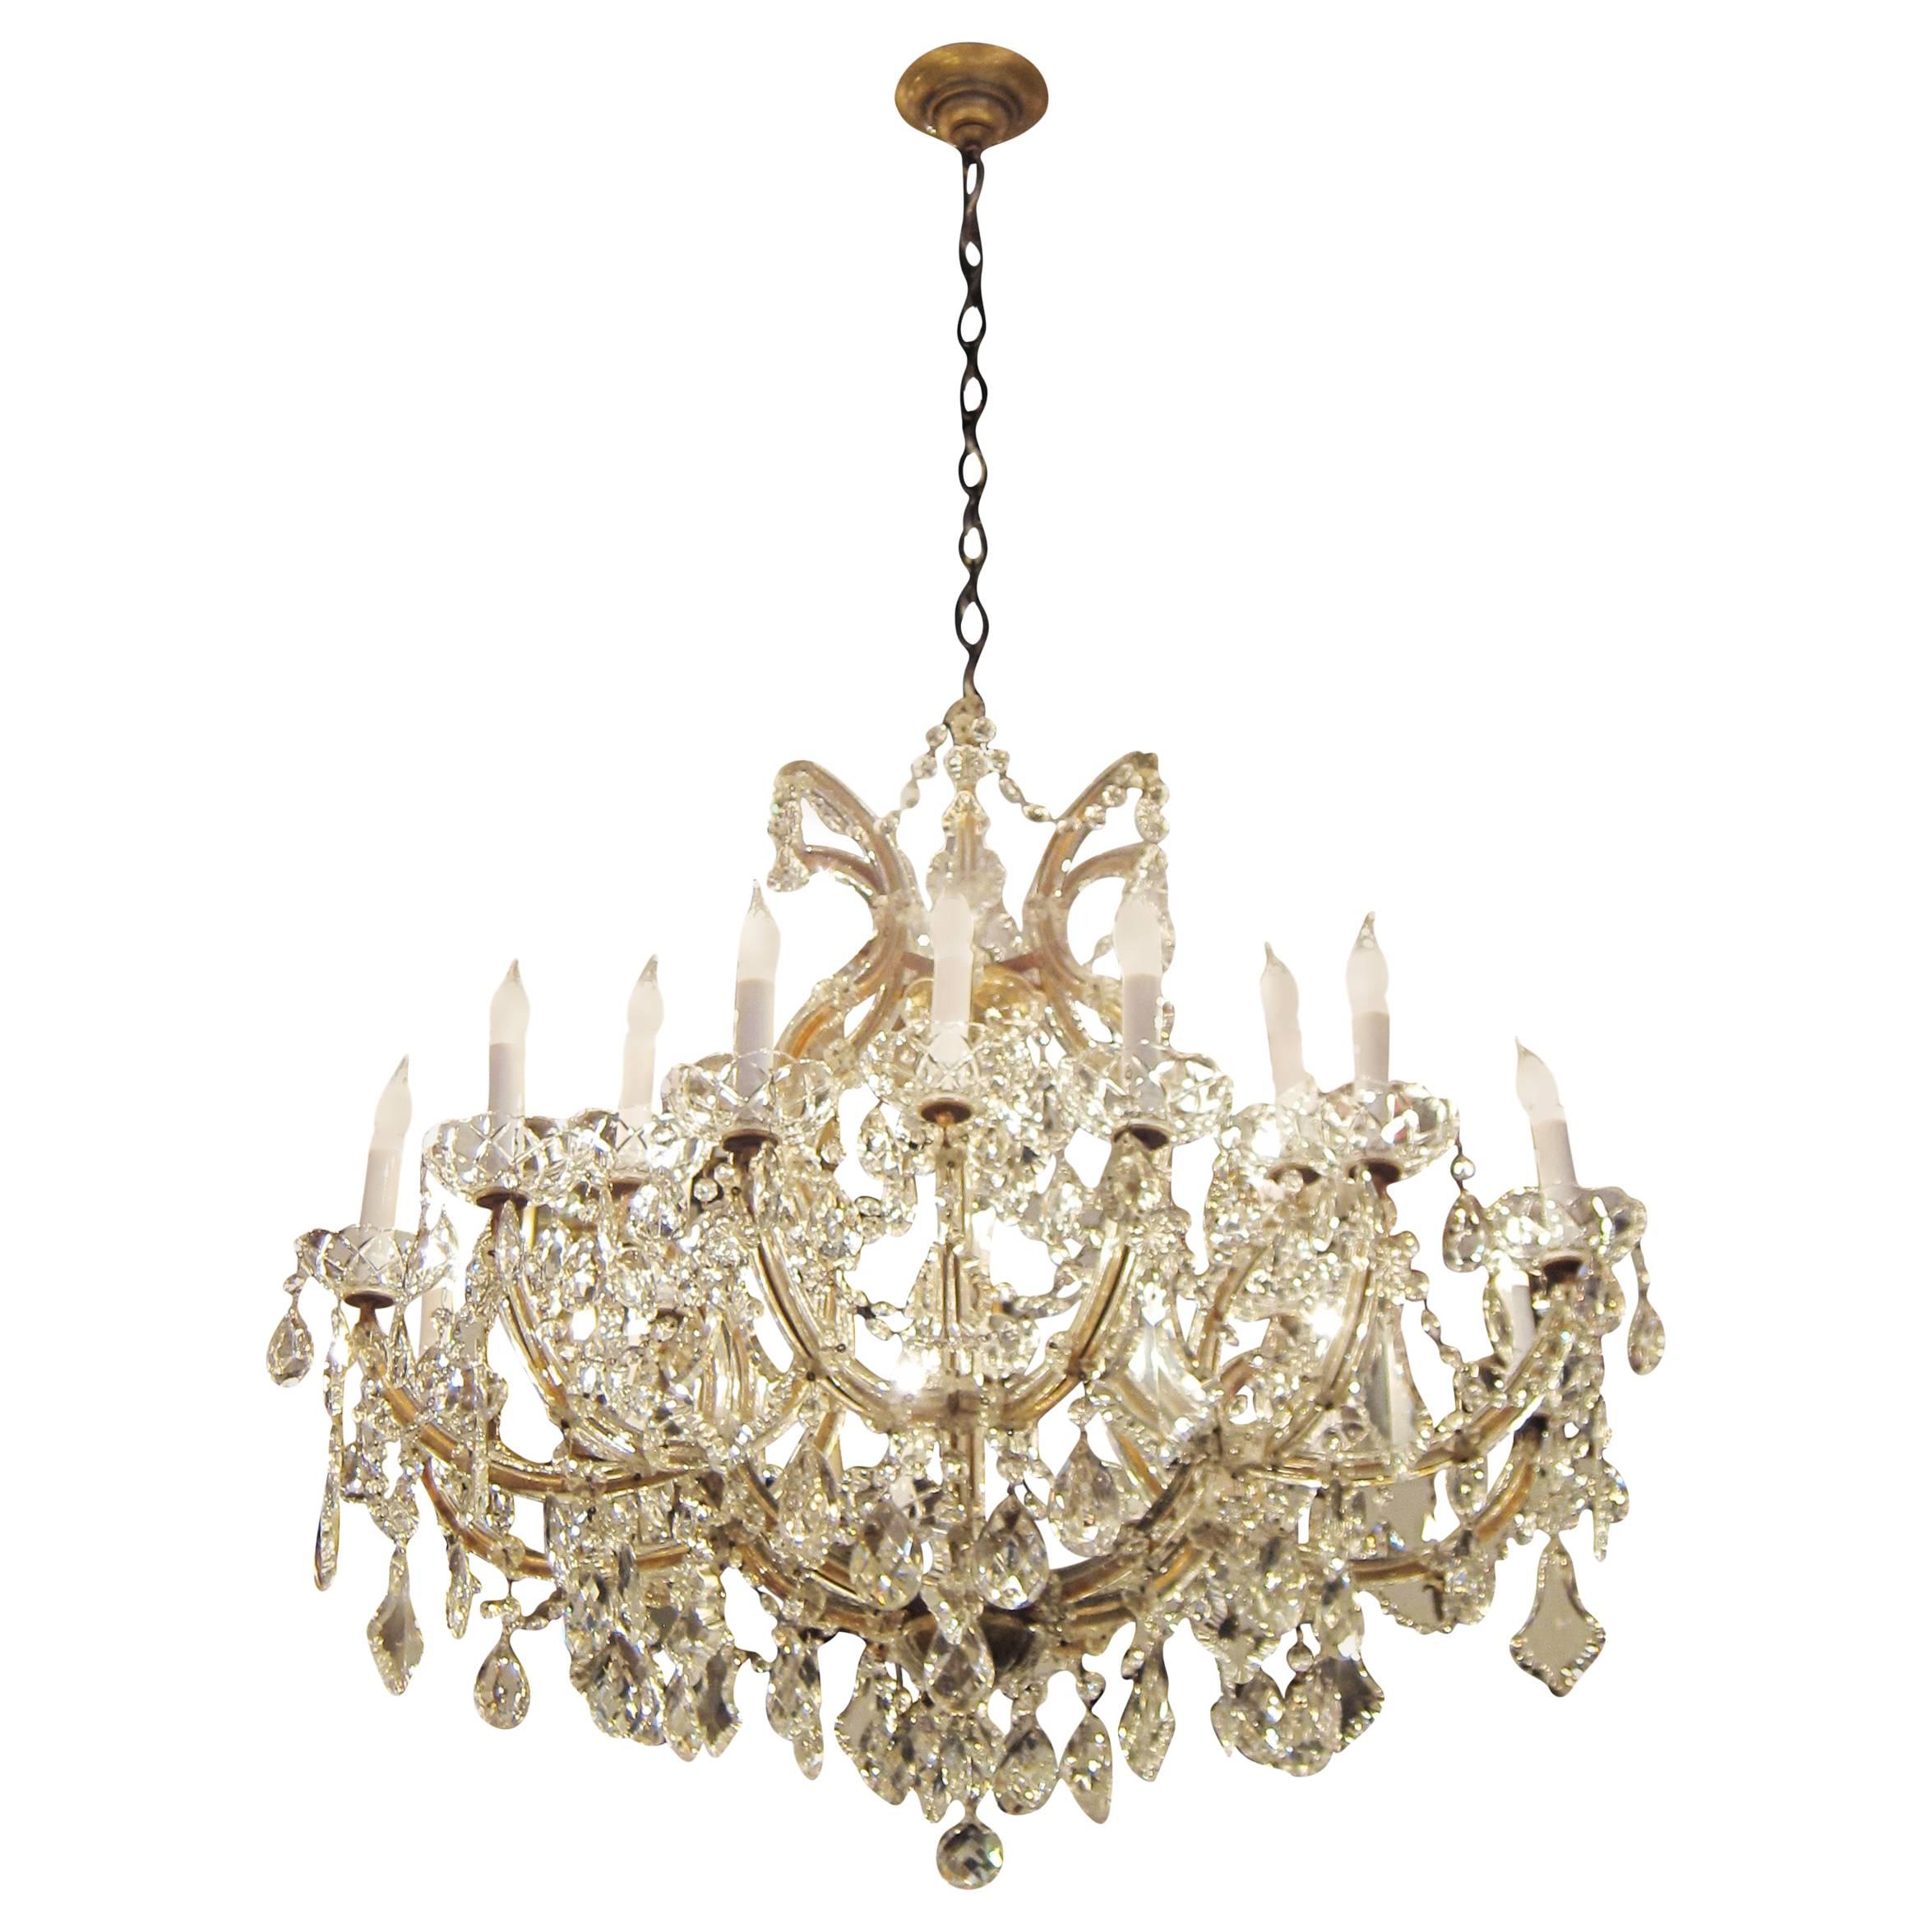 1940s Marie Therese Style Large Crystal Chandelier with 18 Lights